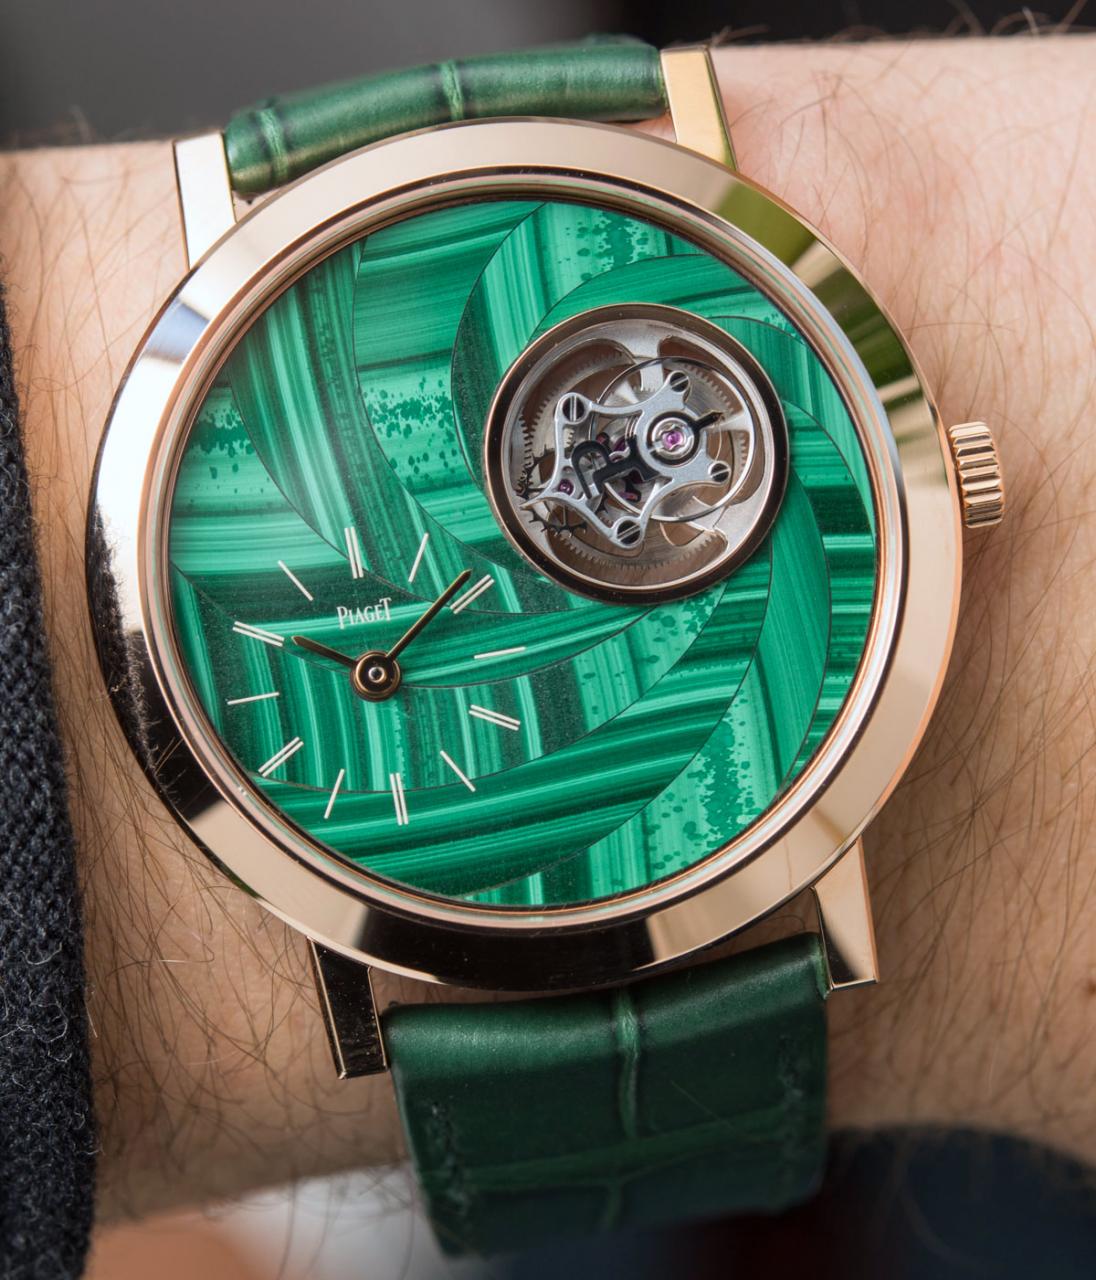 Piaget Altiplano Flying Tourbillon Stone Marquetry Dial Hands-On Hands-On 